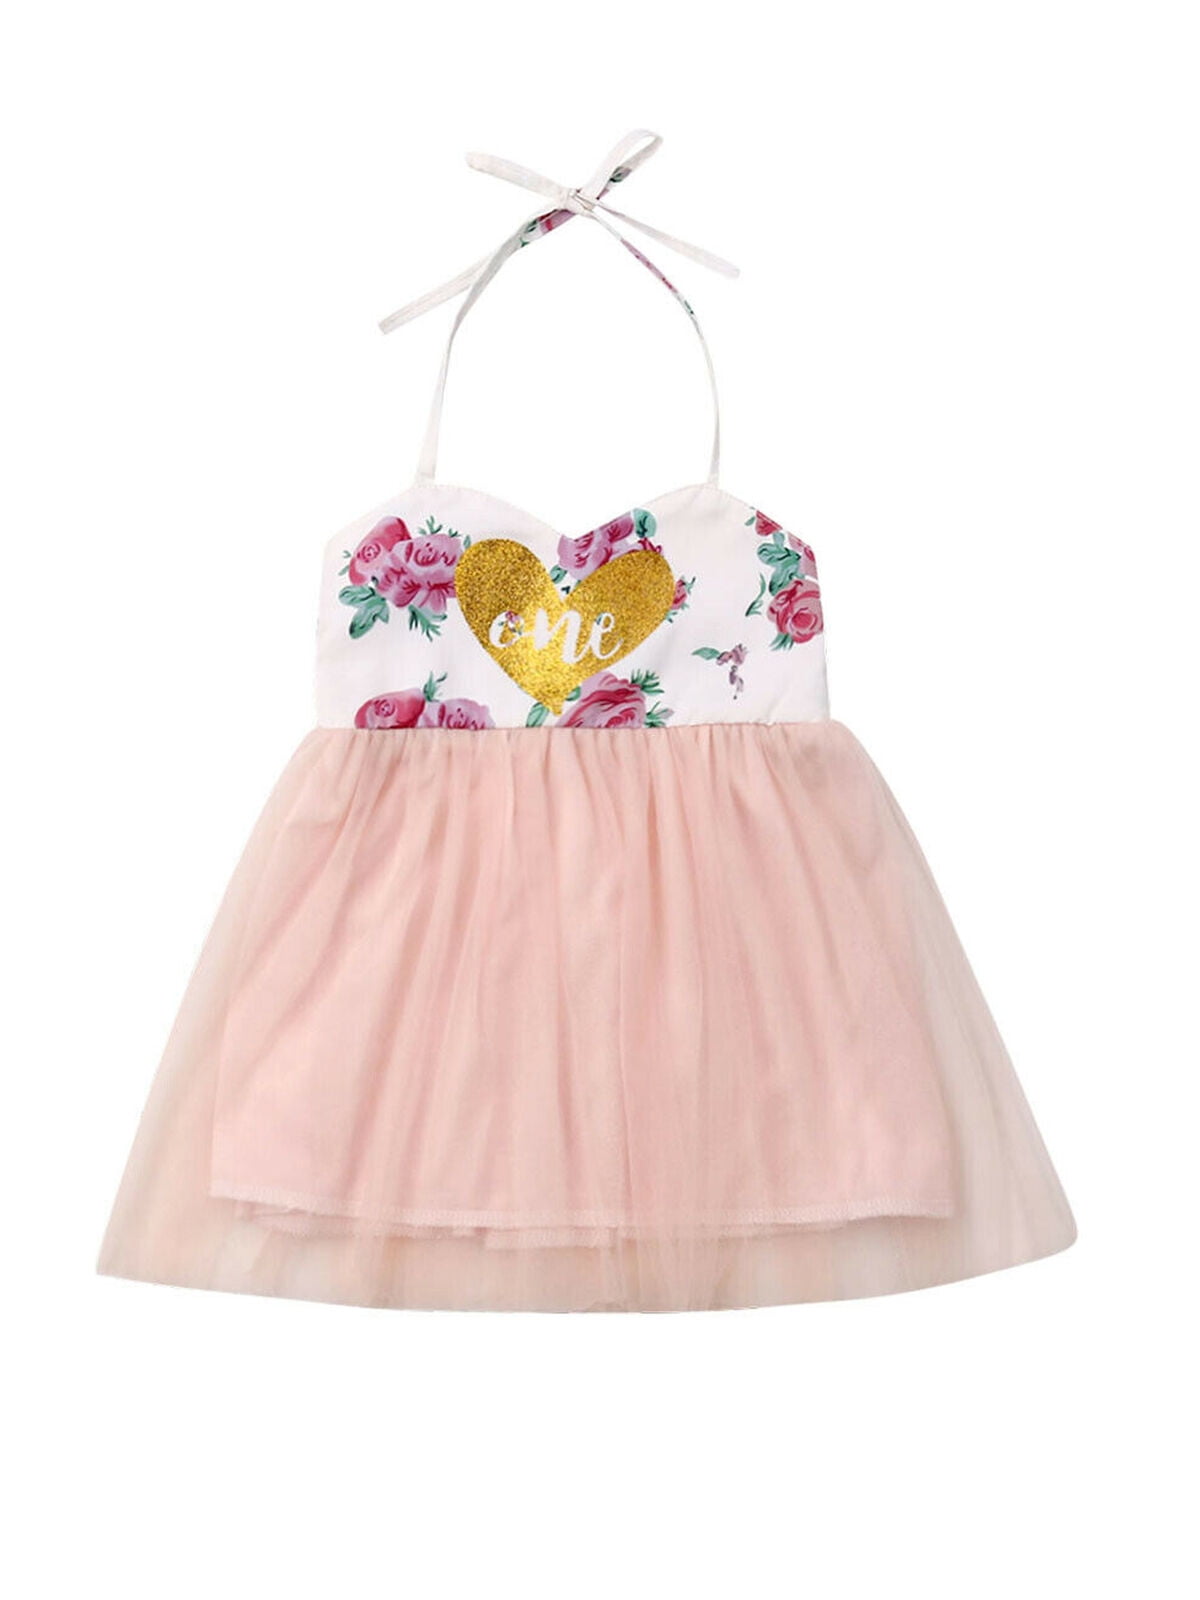 1st One Birthday Kids Infant Baby Girl Floral Dress Princess Party Tutu ...